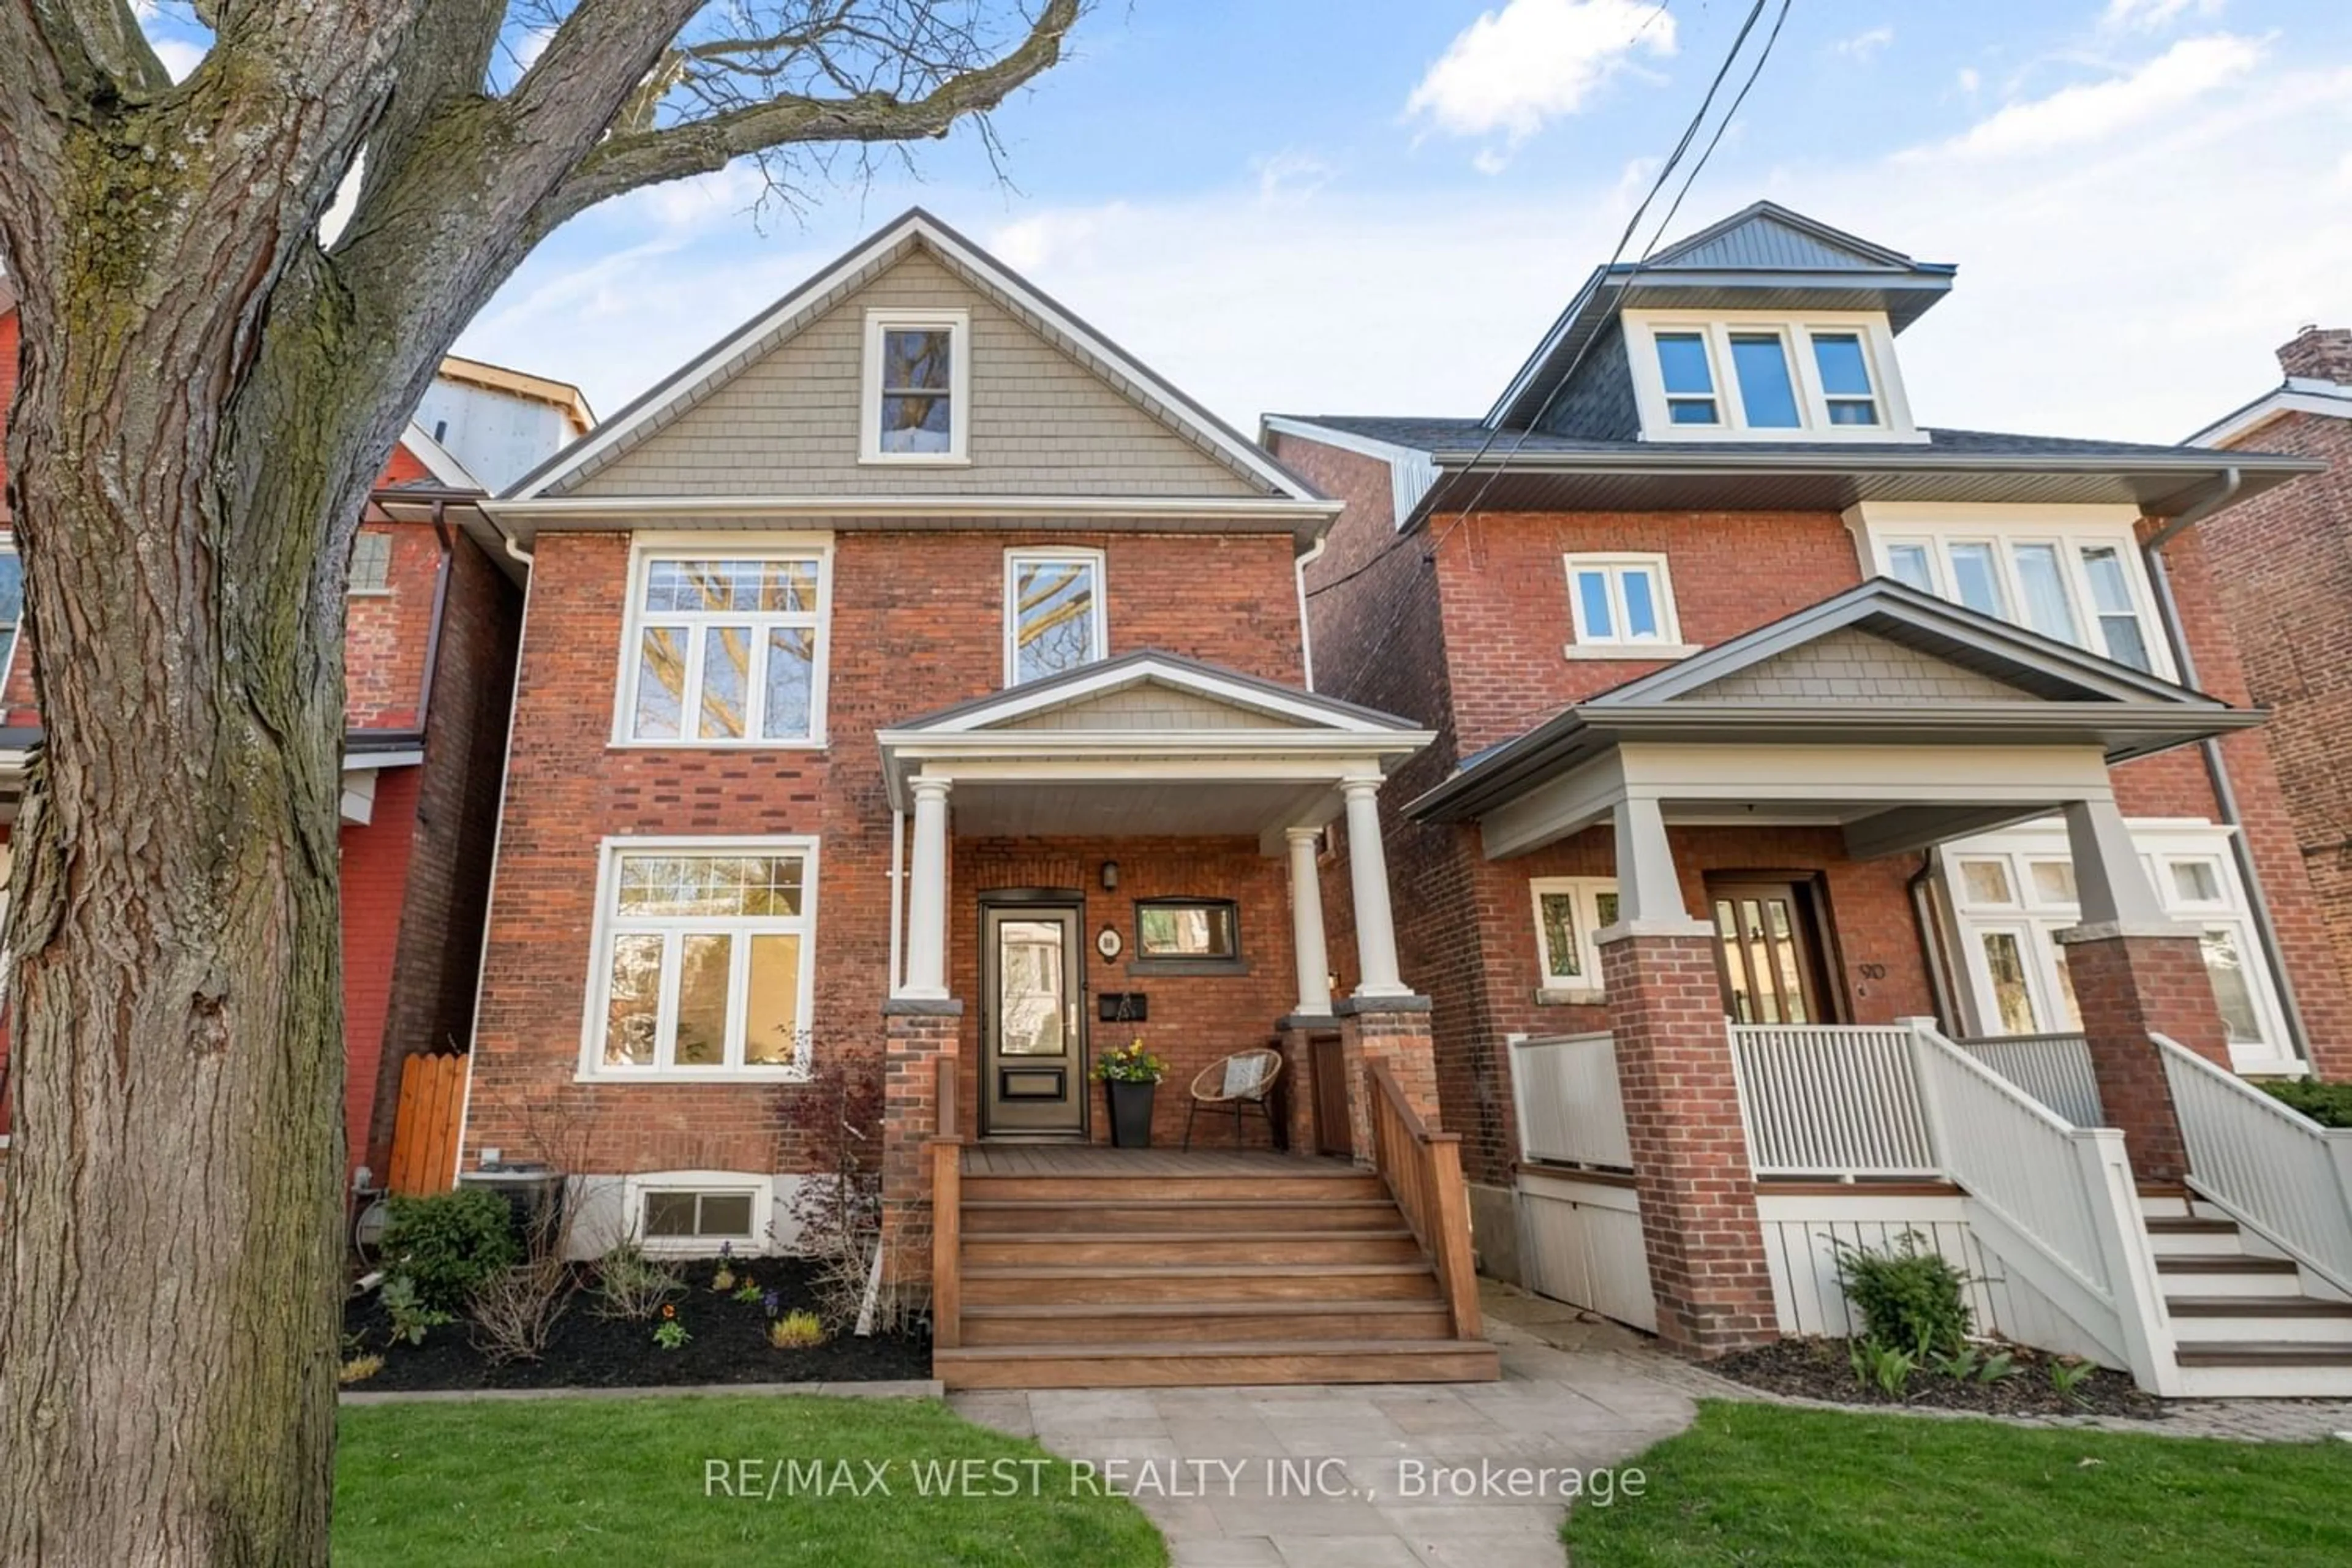 Home with brick exterior material for 88 Fairview Ave, Toronto Ontario M6P 3A4